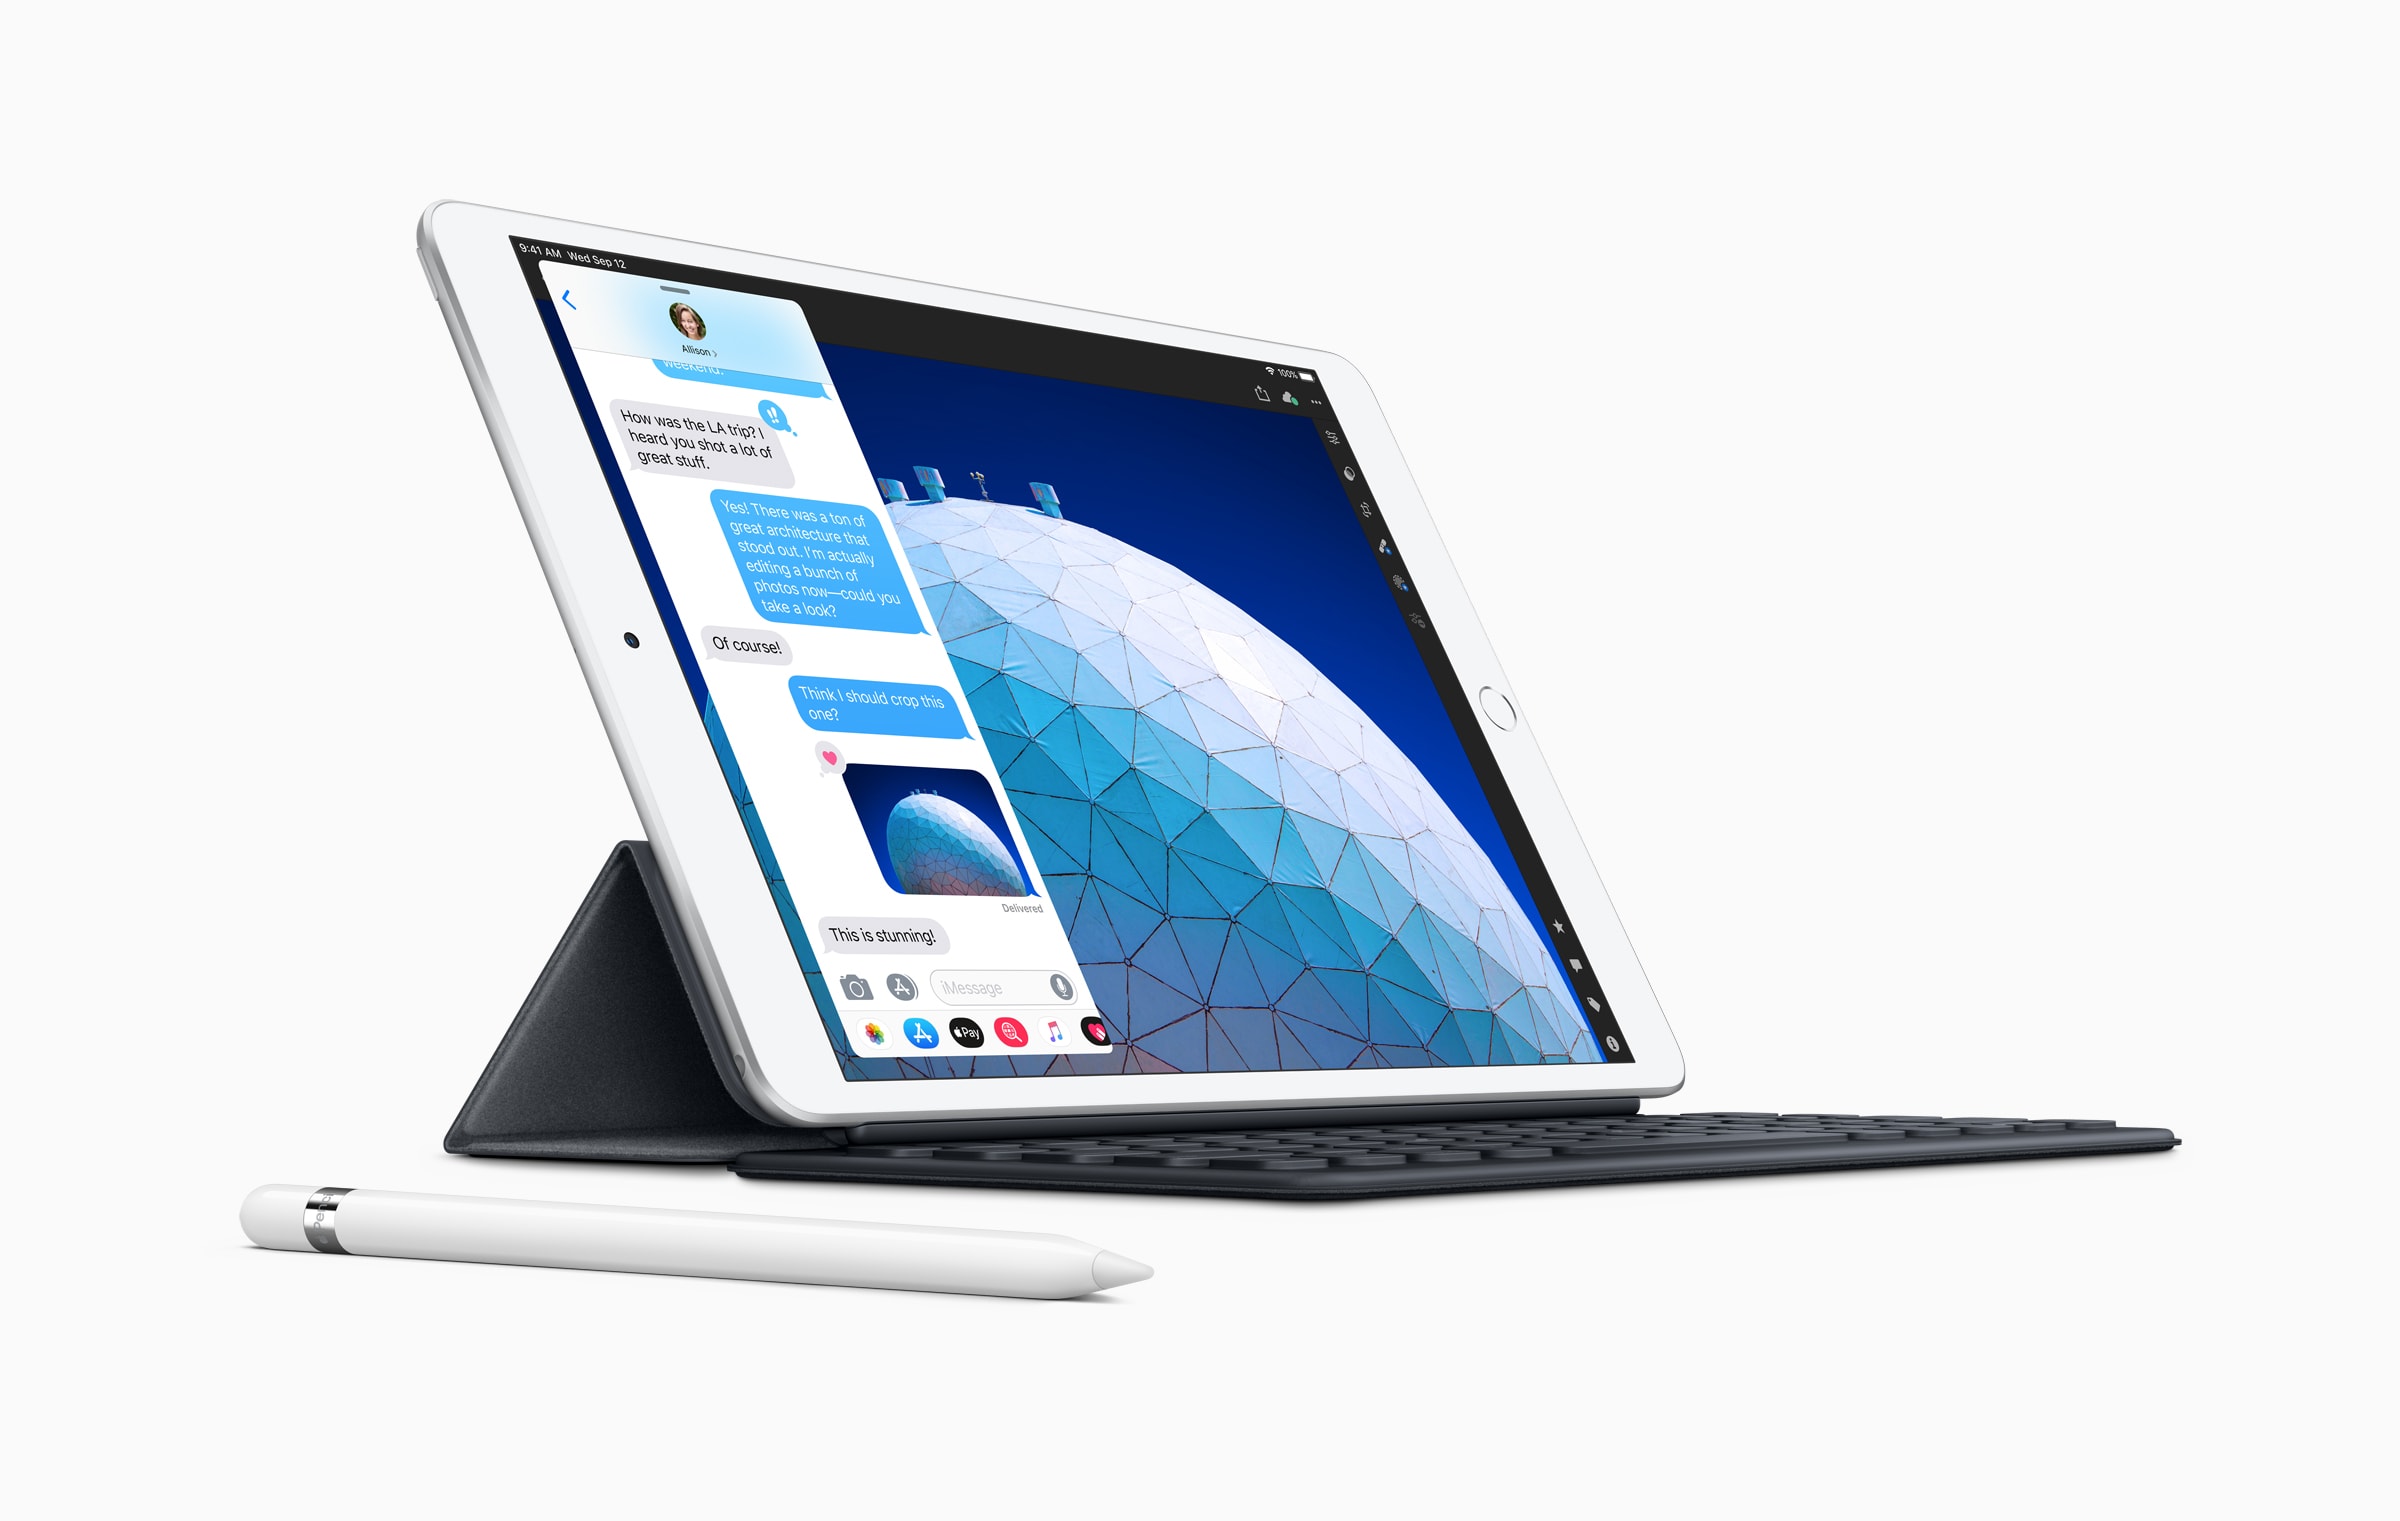 The new 2019 iPad Air, with its 10.5-inch screen, works with Apple's existing Smart Keyboard.